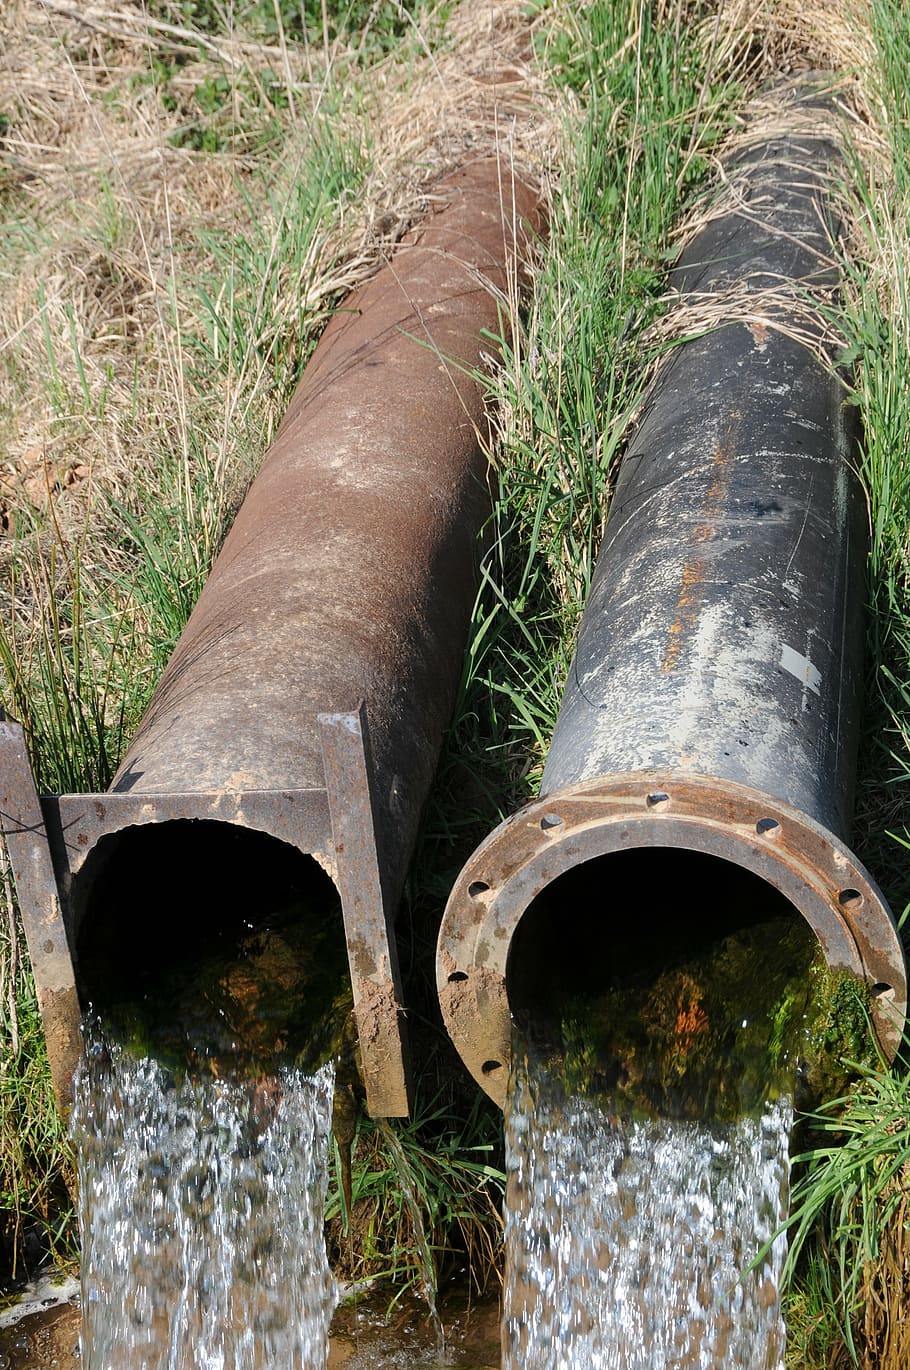 pipes, water, stainless, drainage, fluent, metal, pipe - tube